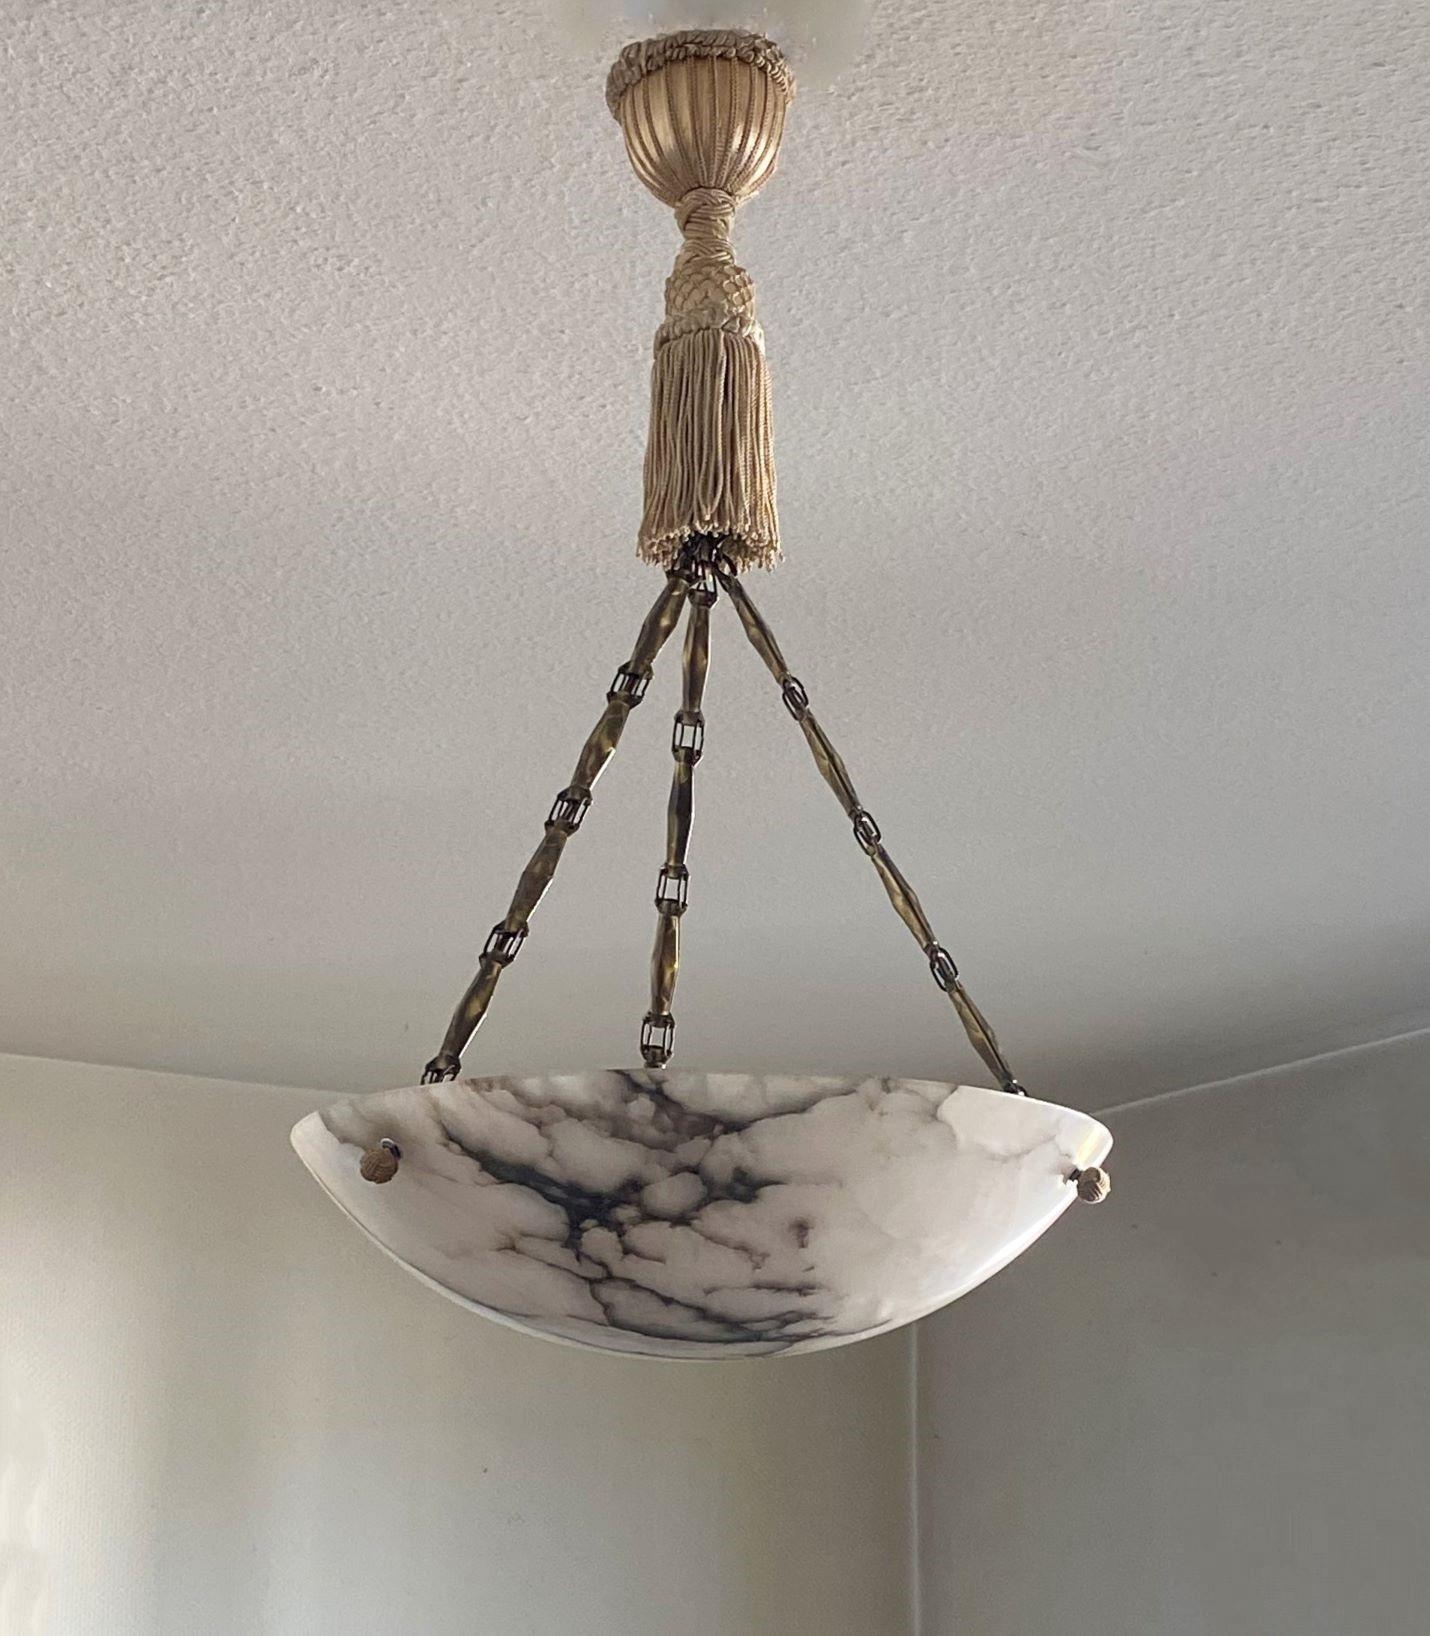 A beautiful Arte Deco alabaster pendant / light fixture, France, 1910-1920. Large polished alabaster with black veins shade, original brass chains connecting to original handmade silk tassel fringe rope and tassel canopy. It takes a E27 screw bulb